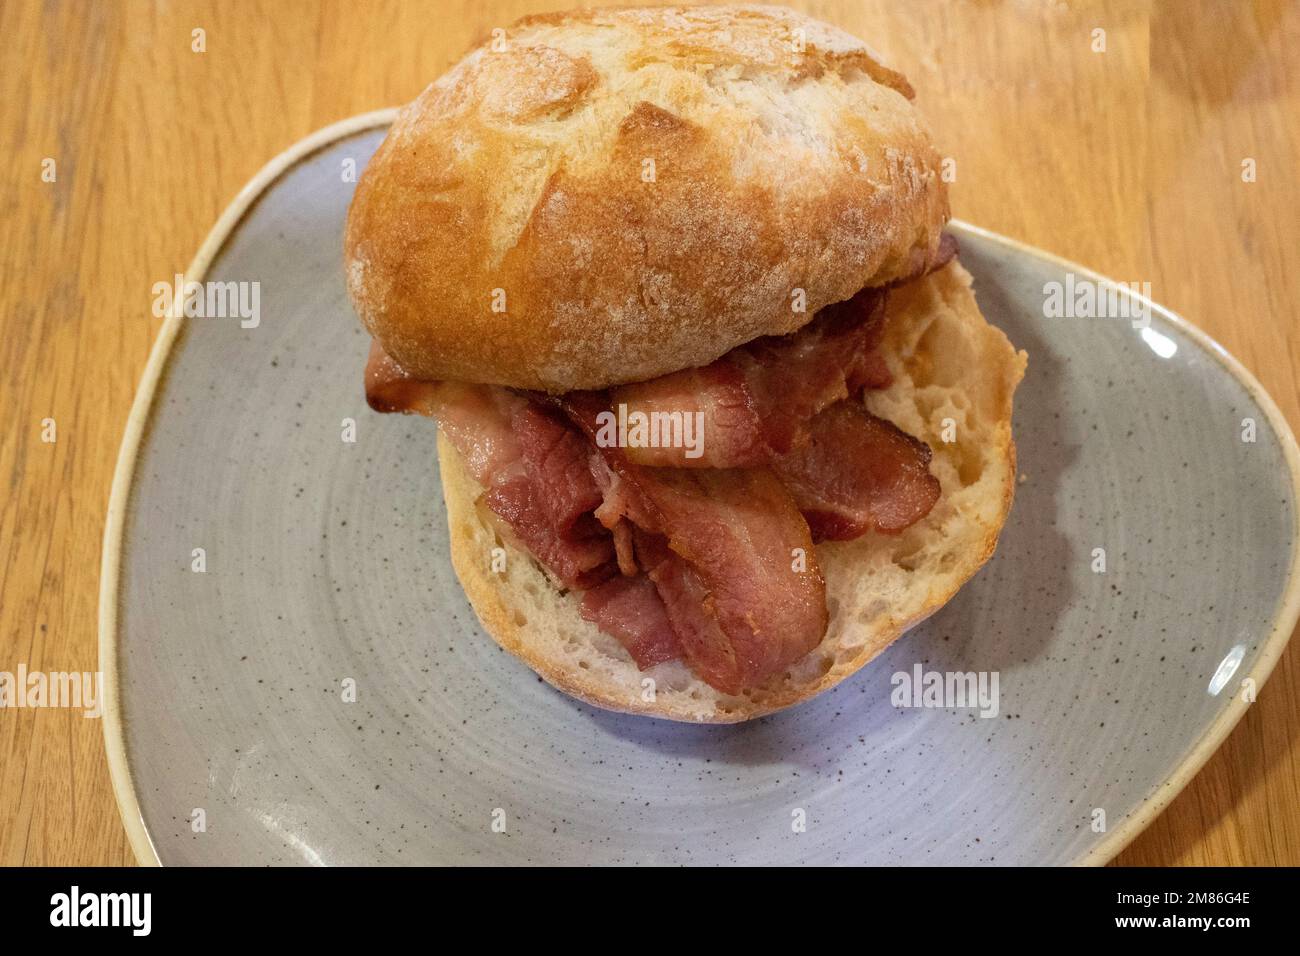 Lunchtime snack in a Yorkshire  café, grilled Bacon in a sourdough Roll Stock Photo